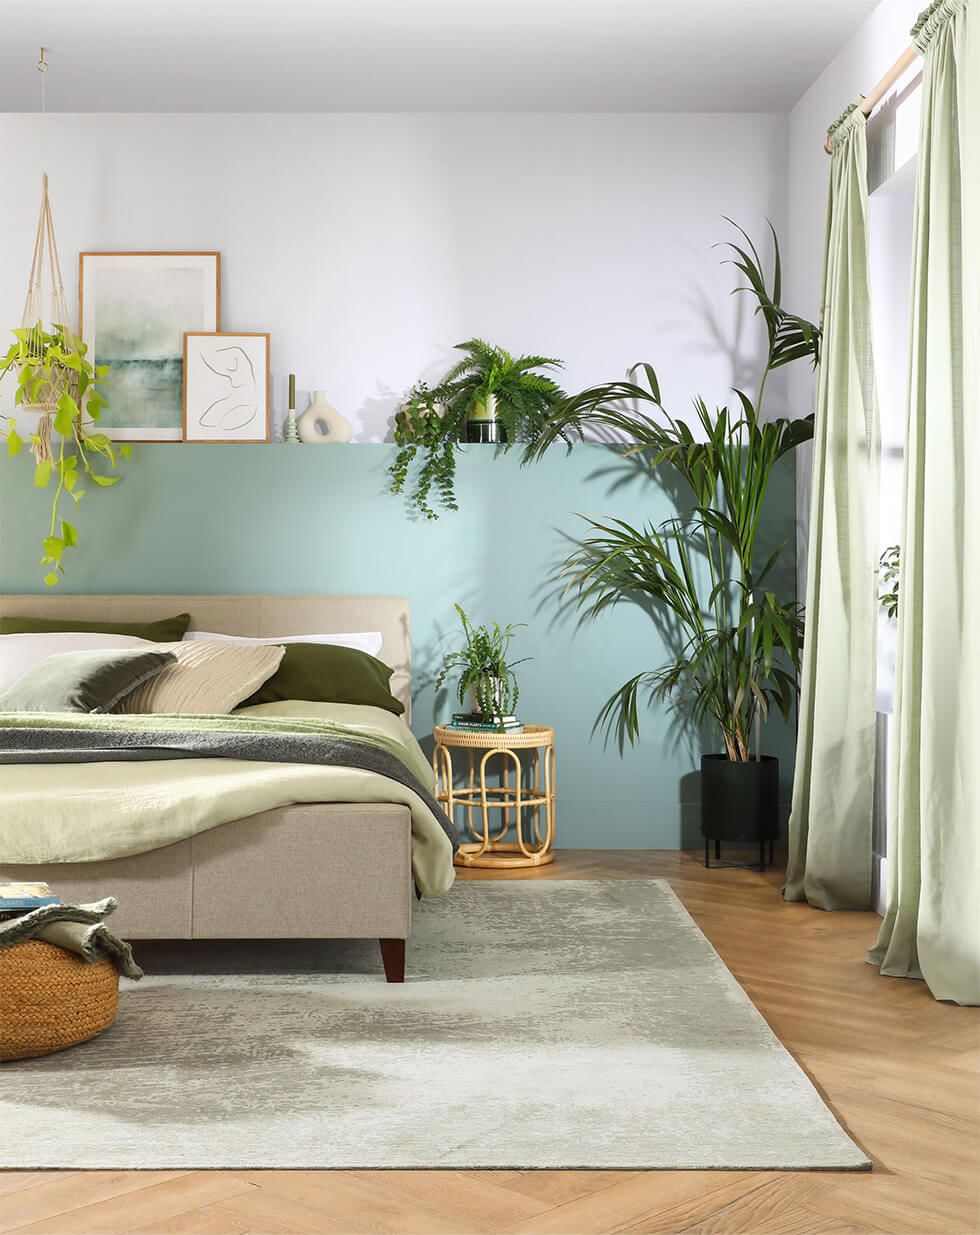 7 Green Bedroom Ideas For A Calming Space